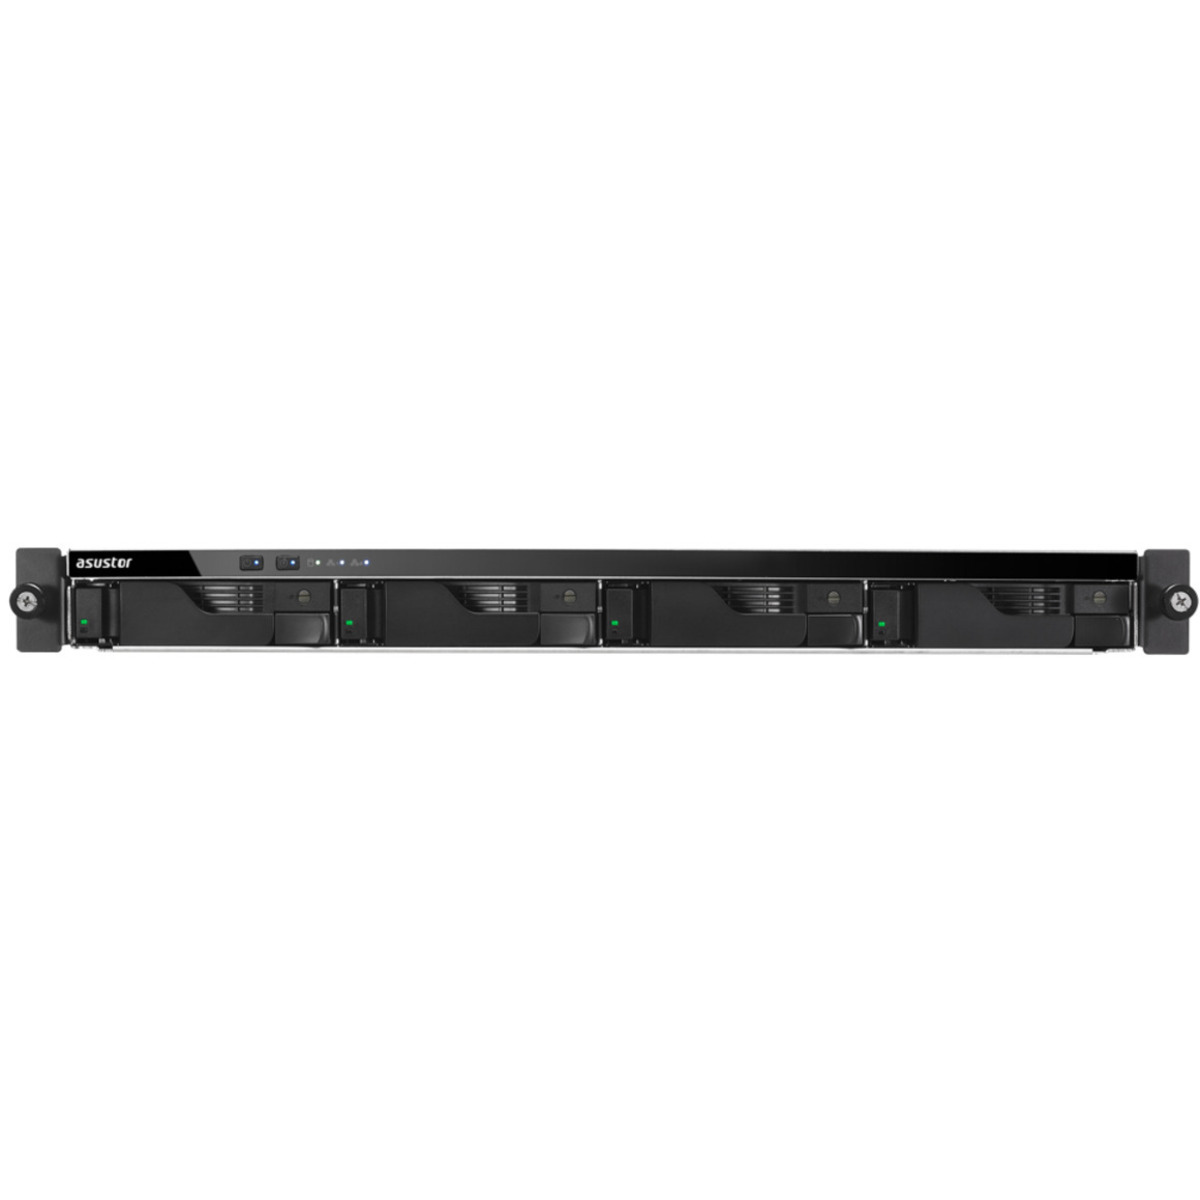 ASUSTOR LOCKERSTOR 4RS AS6504RS 32tb 4-Bay RackMount Multimedia / Power User / Business NAS - Network Attached Storage Device 4x8tb Western Digital Red Pro WD8005FFBX 3.5 7200rpm SATA 6Gb/s HDD NAS Class Drives Installed - Burn-In Tested - FREE RAM UPGRADE LOCKERSTOR 4RS AS6504RS